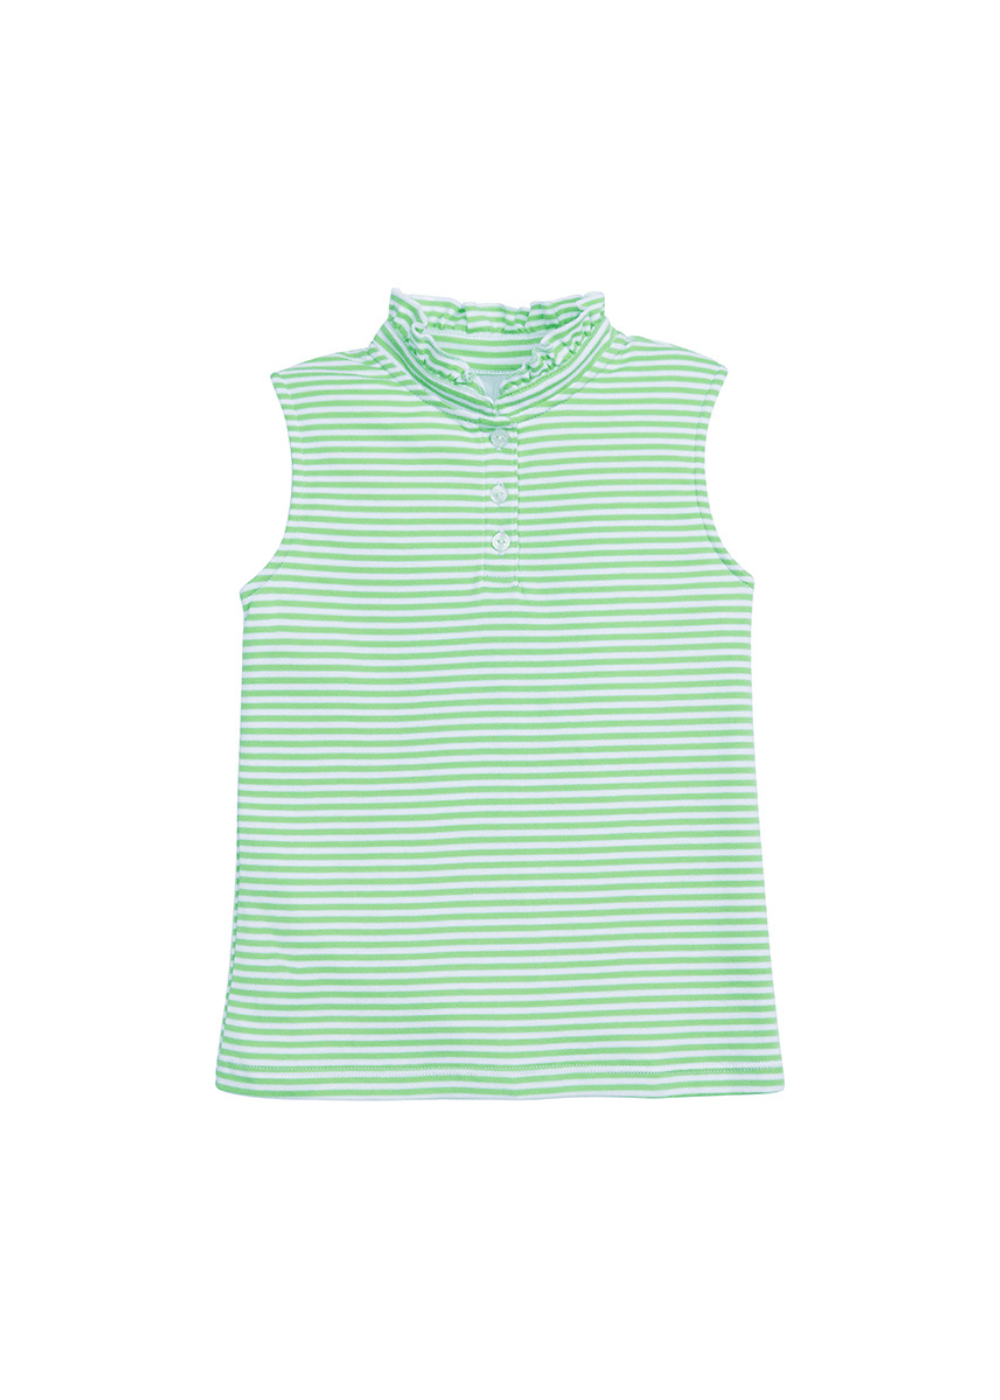 classic childrens clothing girls tank with ruffle collar in green and white stripes